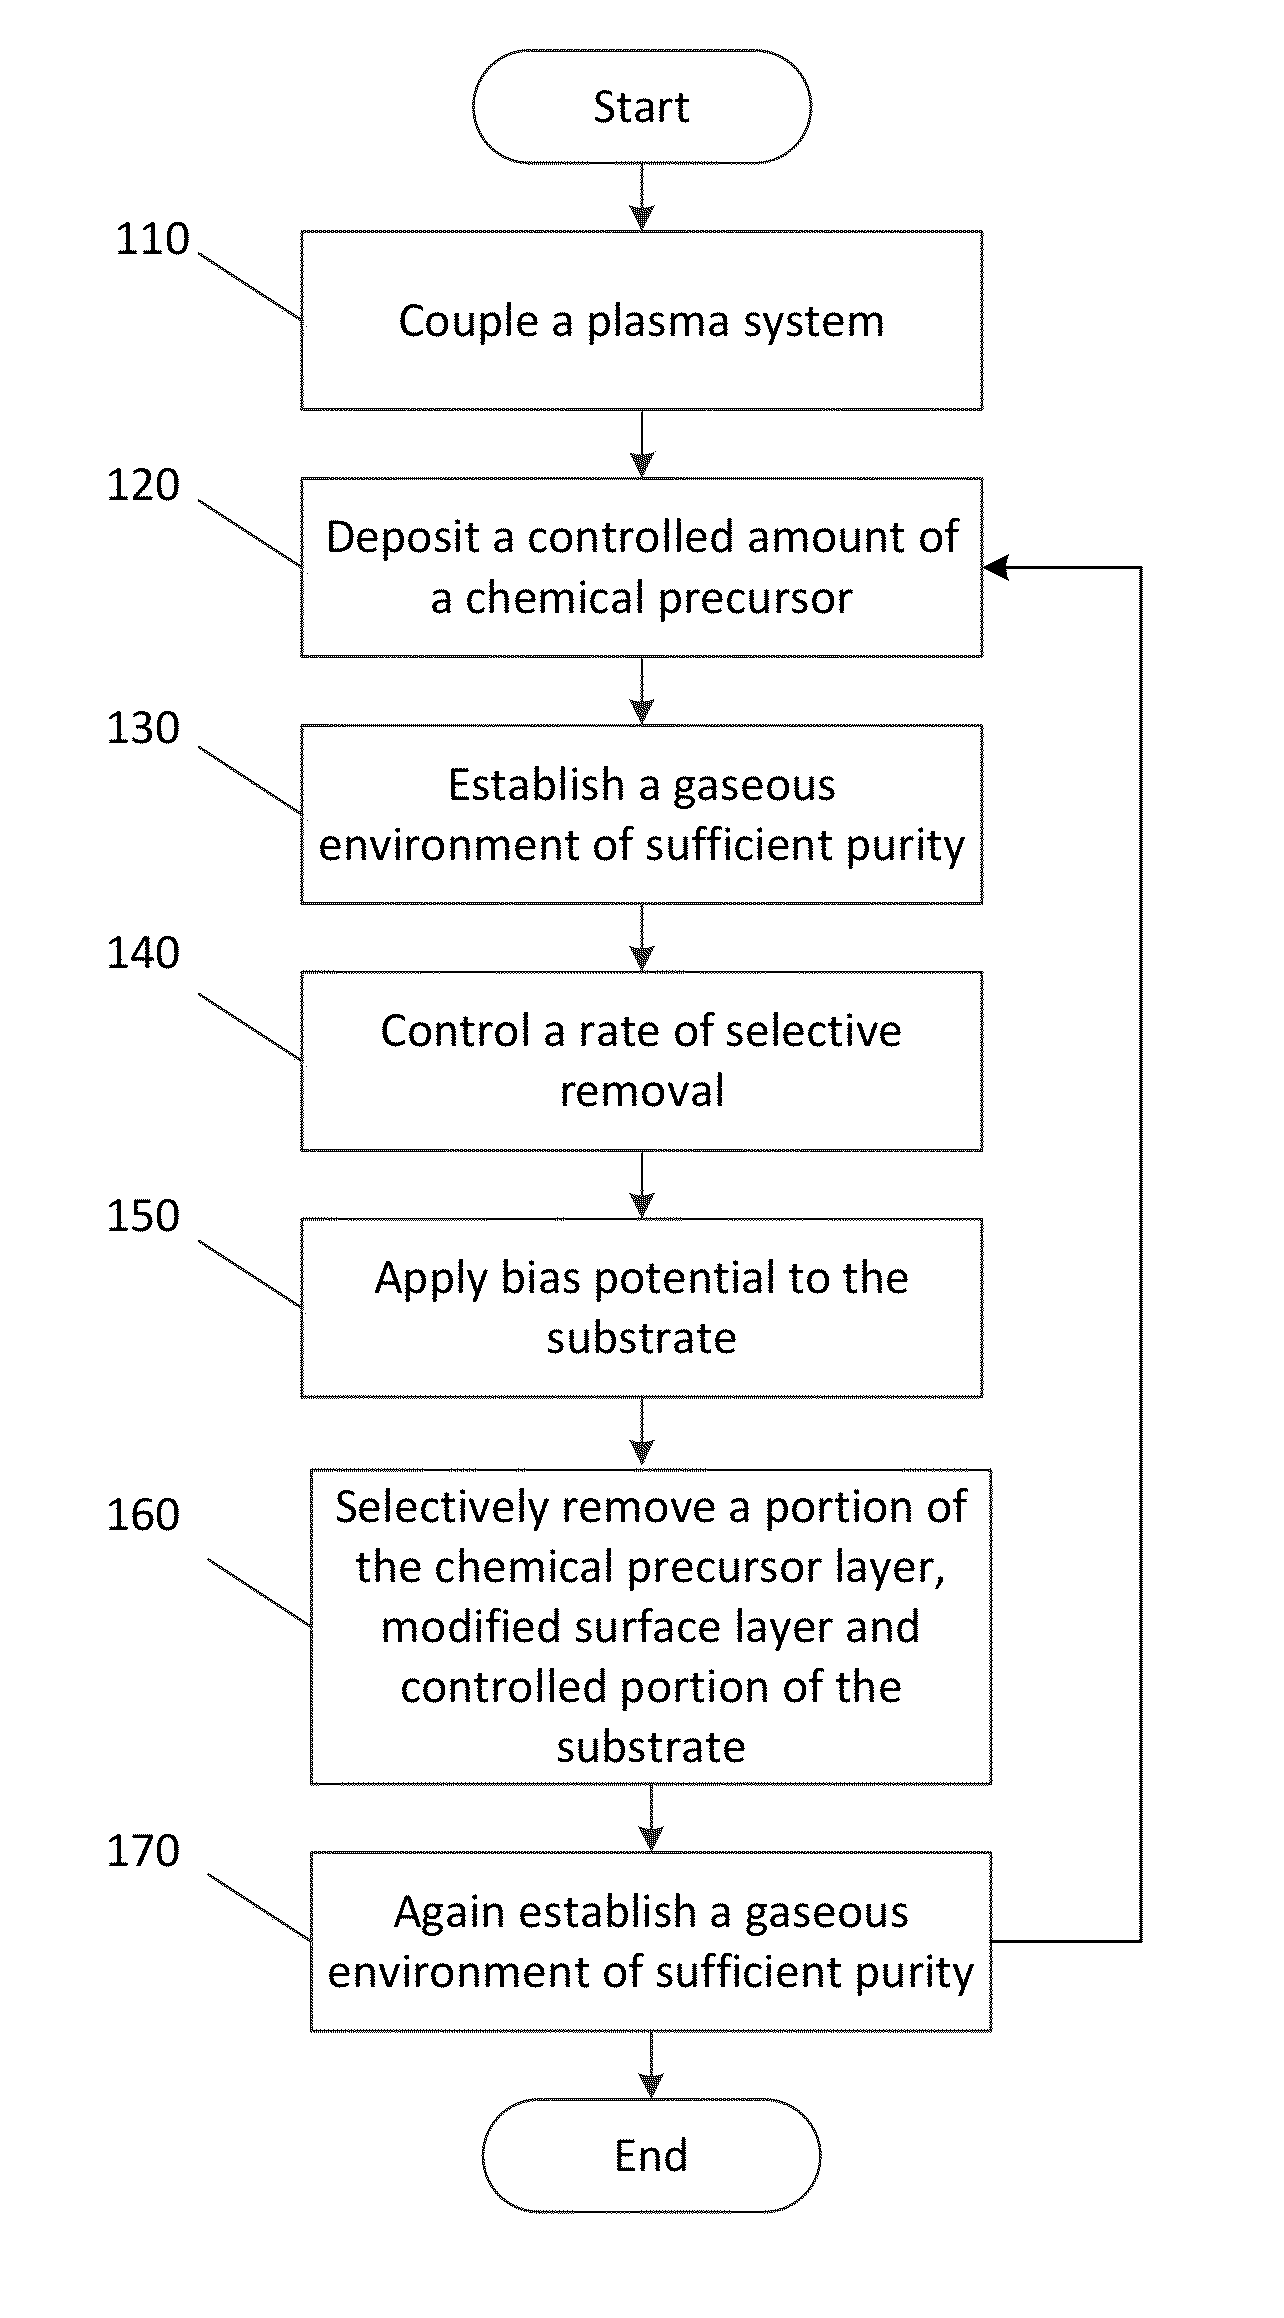 Reactor for plasma-based atomic layer etching of materials